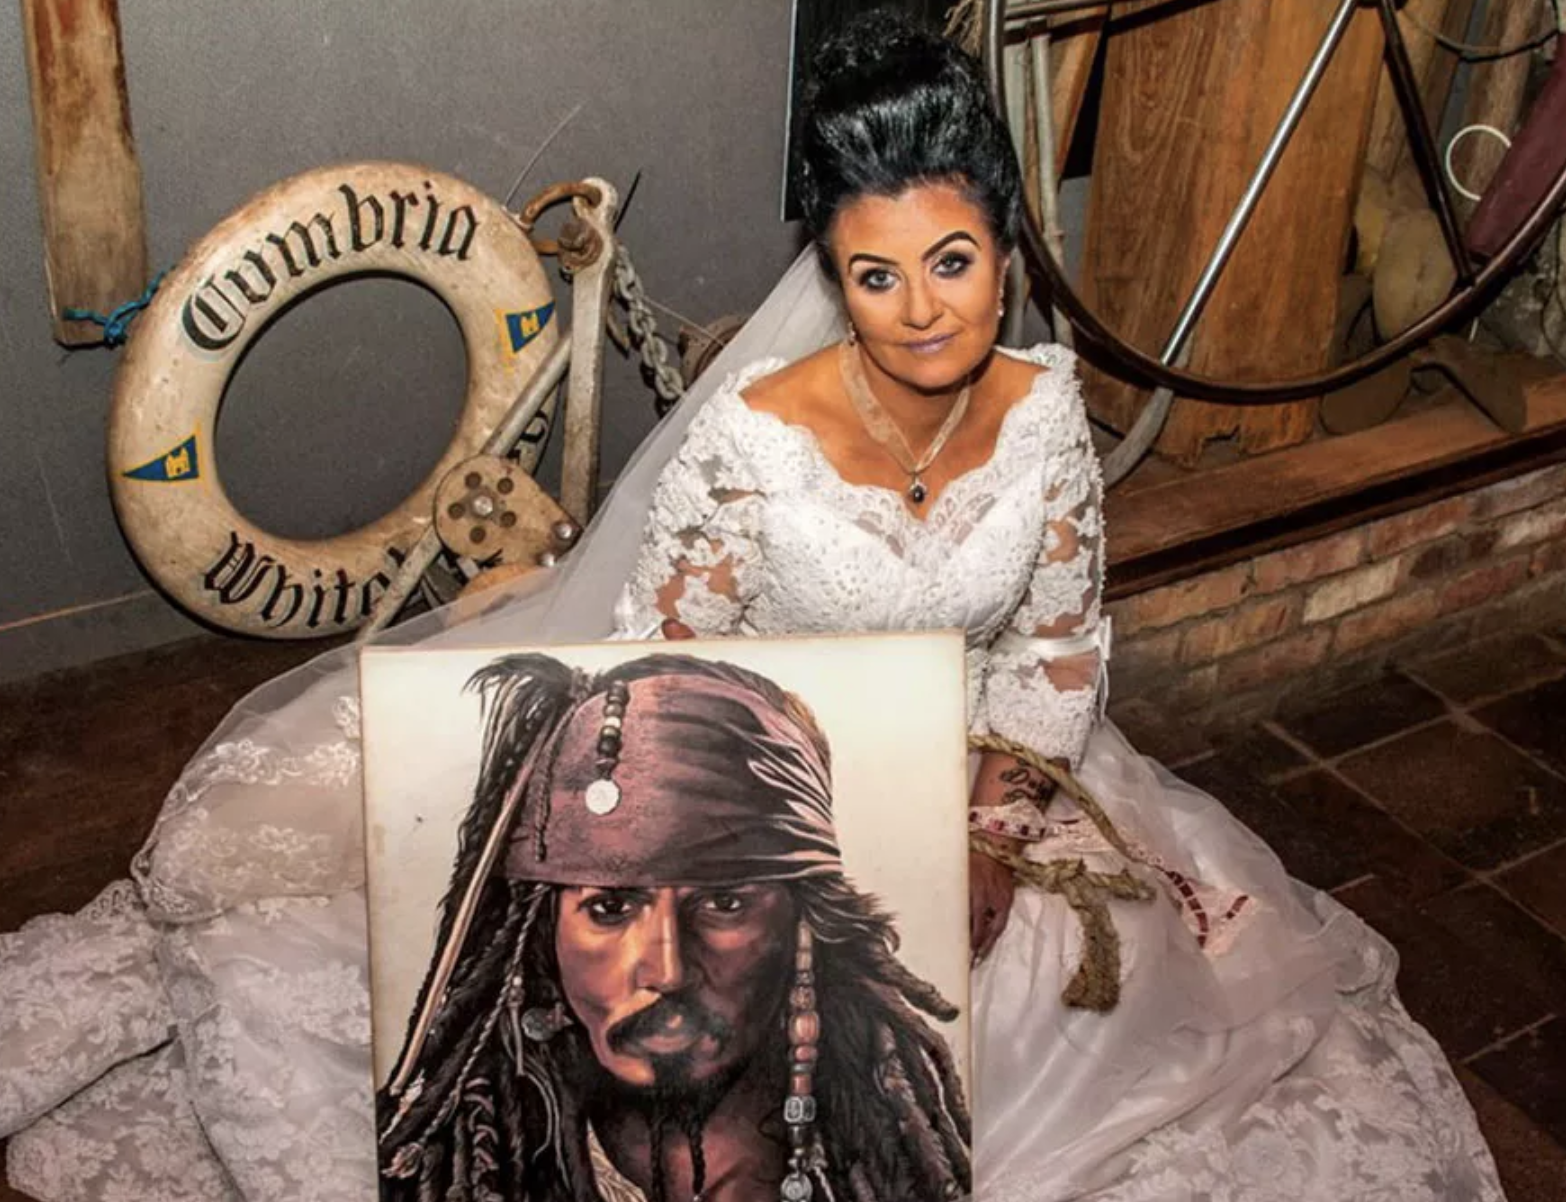 Though Amanda Teague may have found love in the 300-year-old ghost of a pirate named Jack, their marriage was short lived, the pair calling it quits after four years together.  “I feel it’s time to let everyone know that my marriage is over,” she said of their union. “I will explain all in due course but for now all I want to say is be VERY careful when dabbling in spirituality, it’s not something to mess with…”